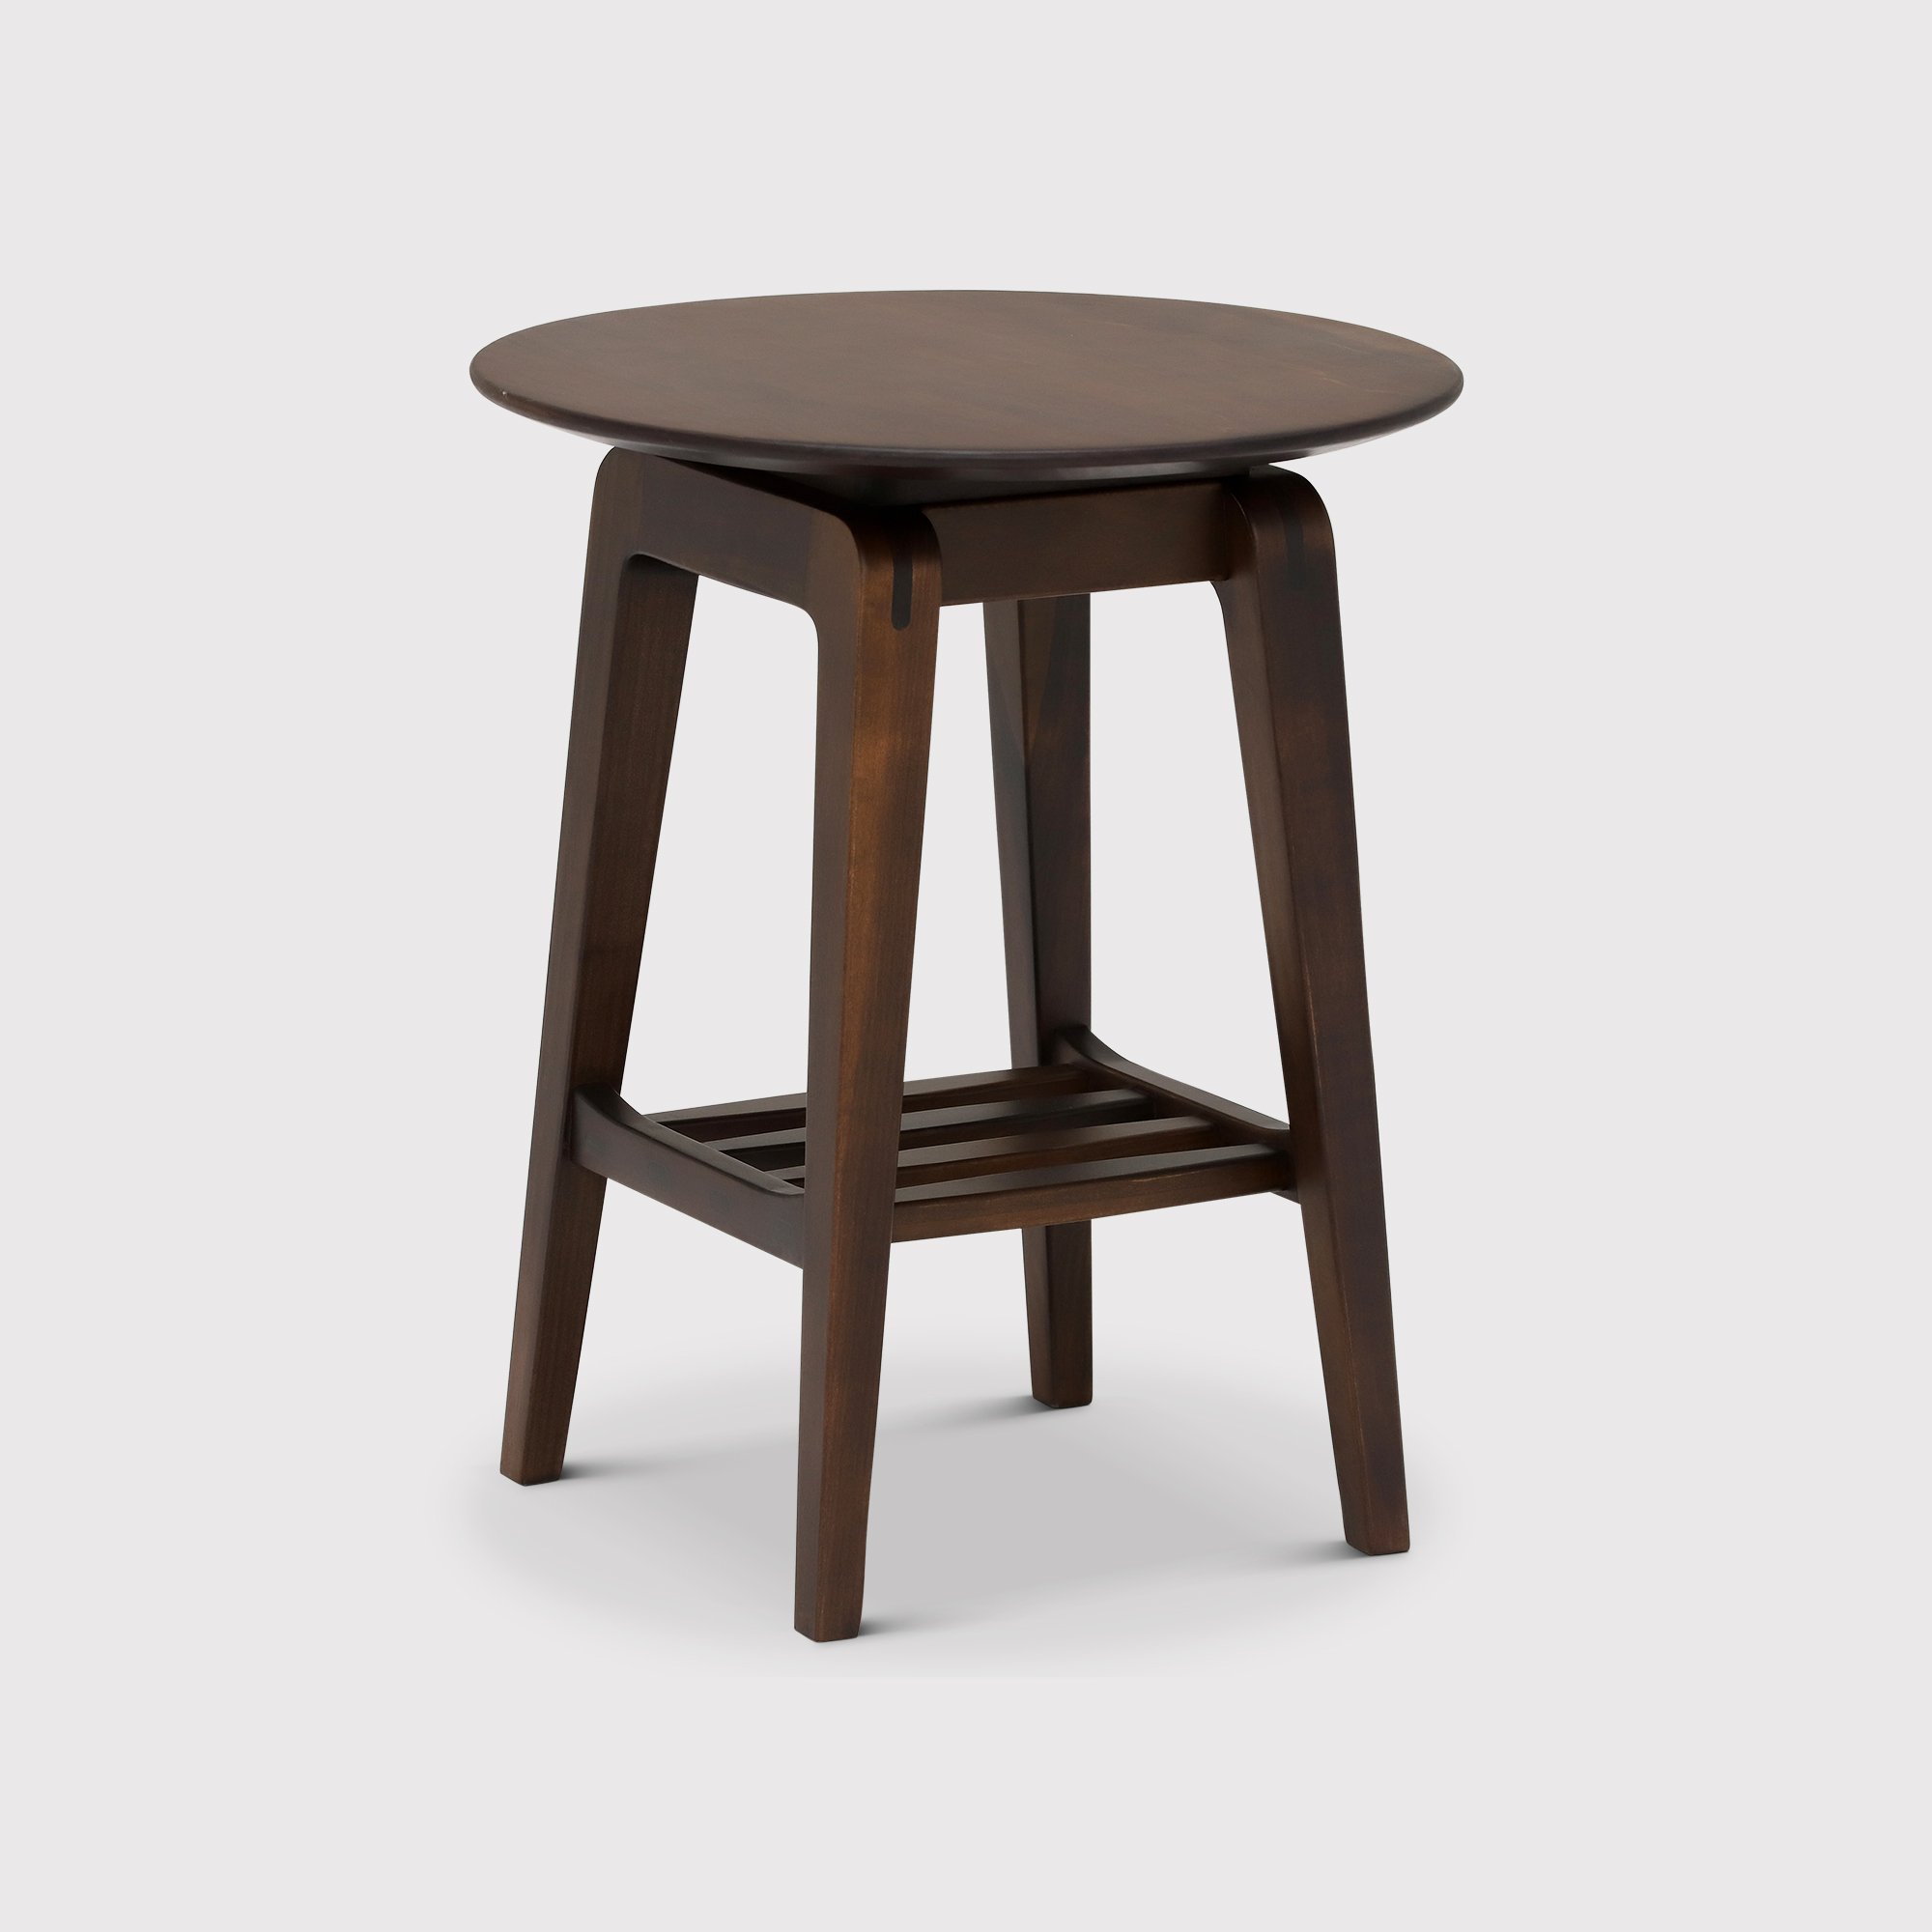 Ercol Lugo Side Table, Round, Brown | Barker & Stonehouse